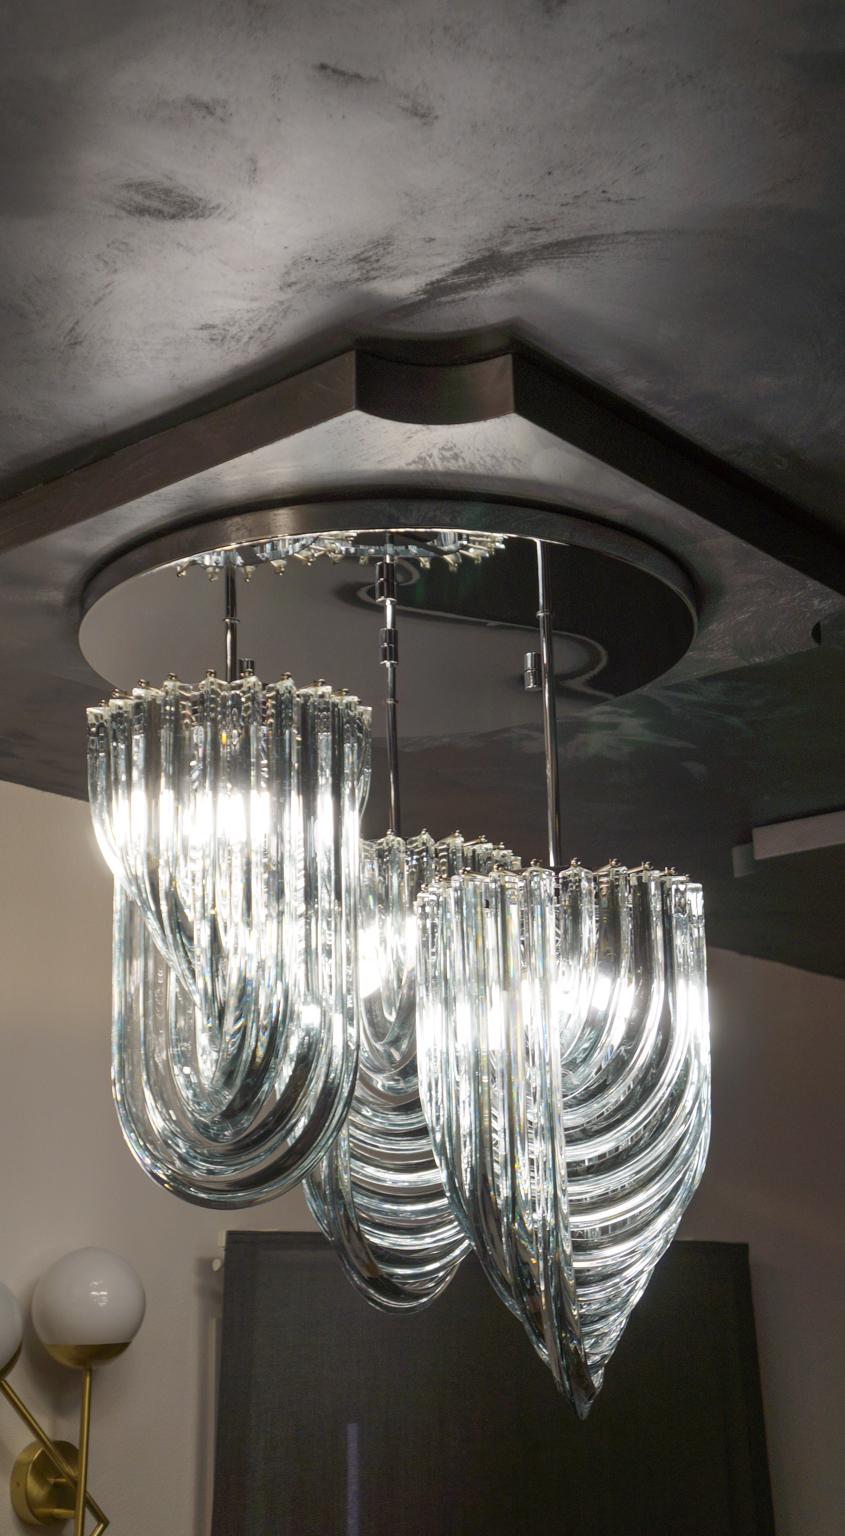 Murano blown glass chandelier with 33 crystal elements and the structure is in silver chrome.
This typical chandelier is the specialty of the Murano glass master Alberto Donà. The assistants take a small amount of glass from the oven. Being its